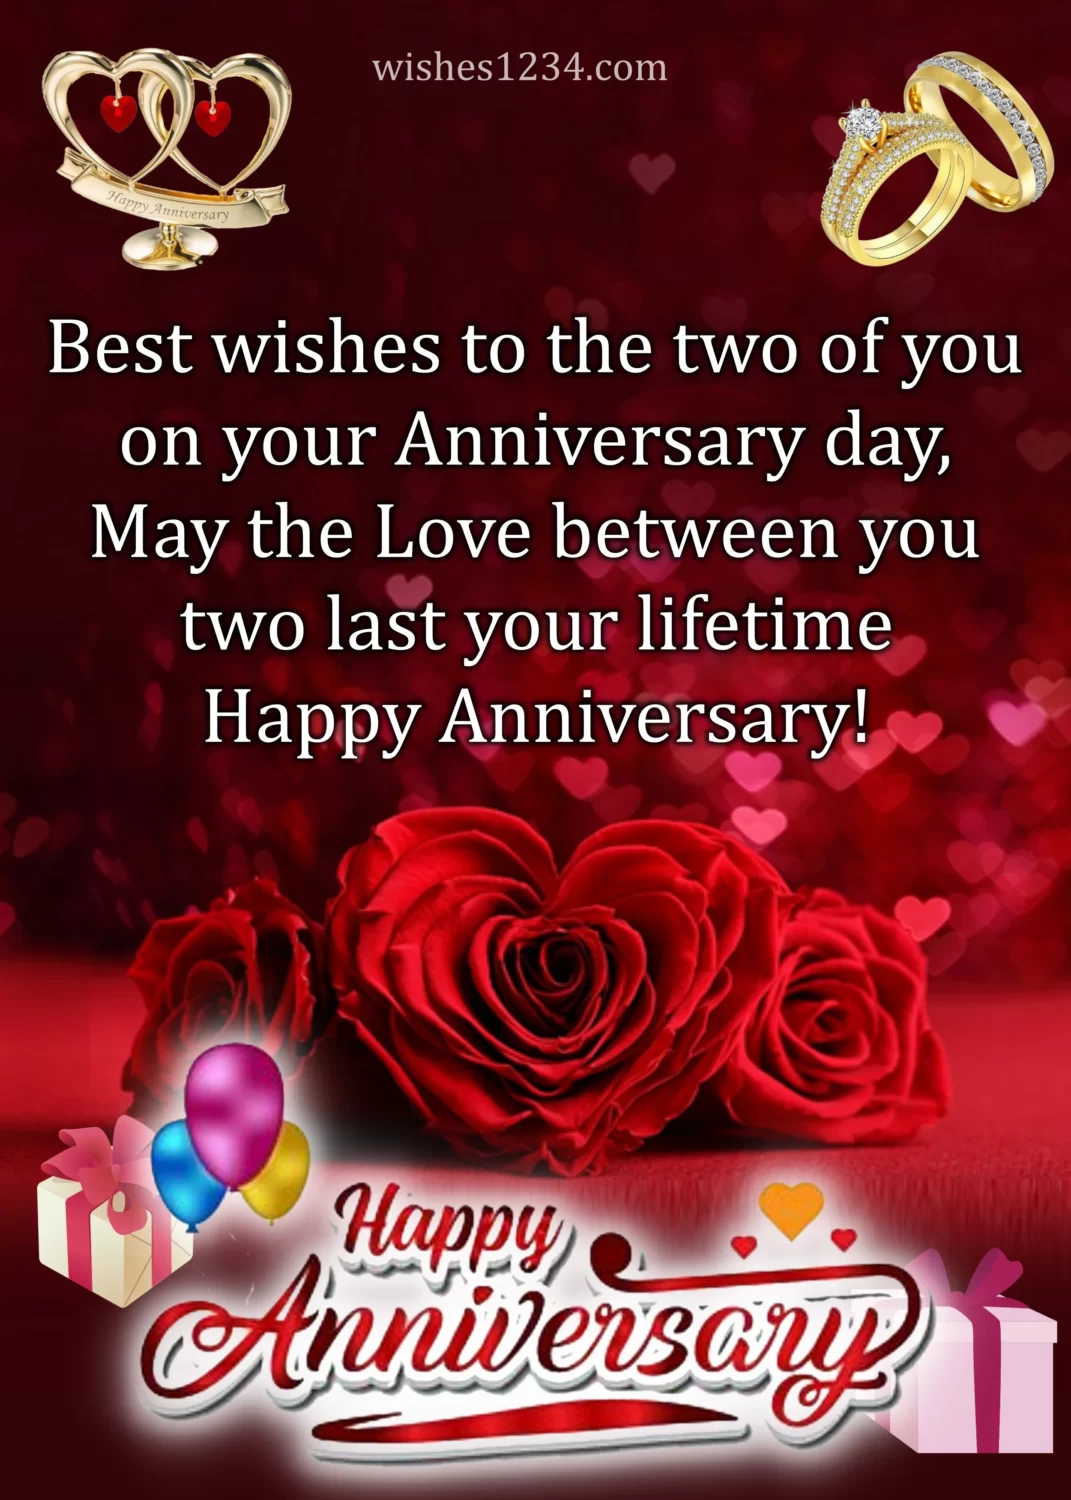 Marriage anniversary with heart shaped rose wallpaper, Wedding Anniversary Quotes.